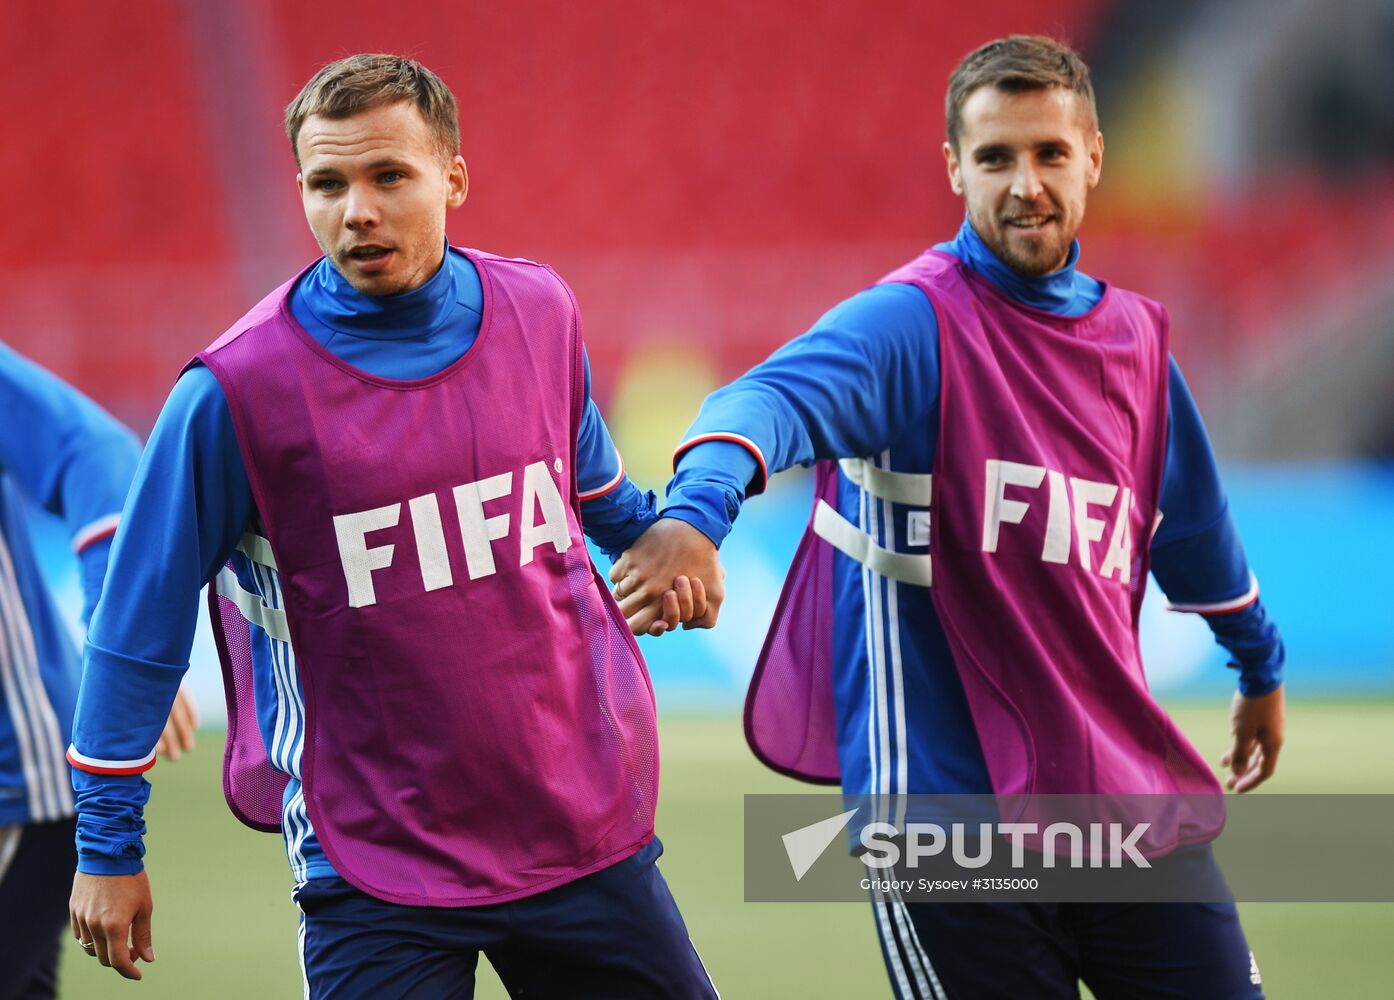 Football. 2017 FIFA Confederations Cup. Training session of Russia's national team